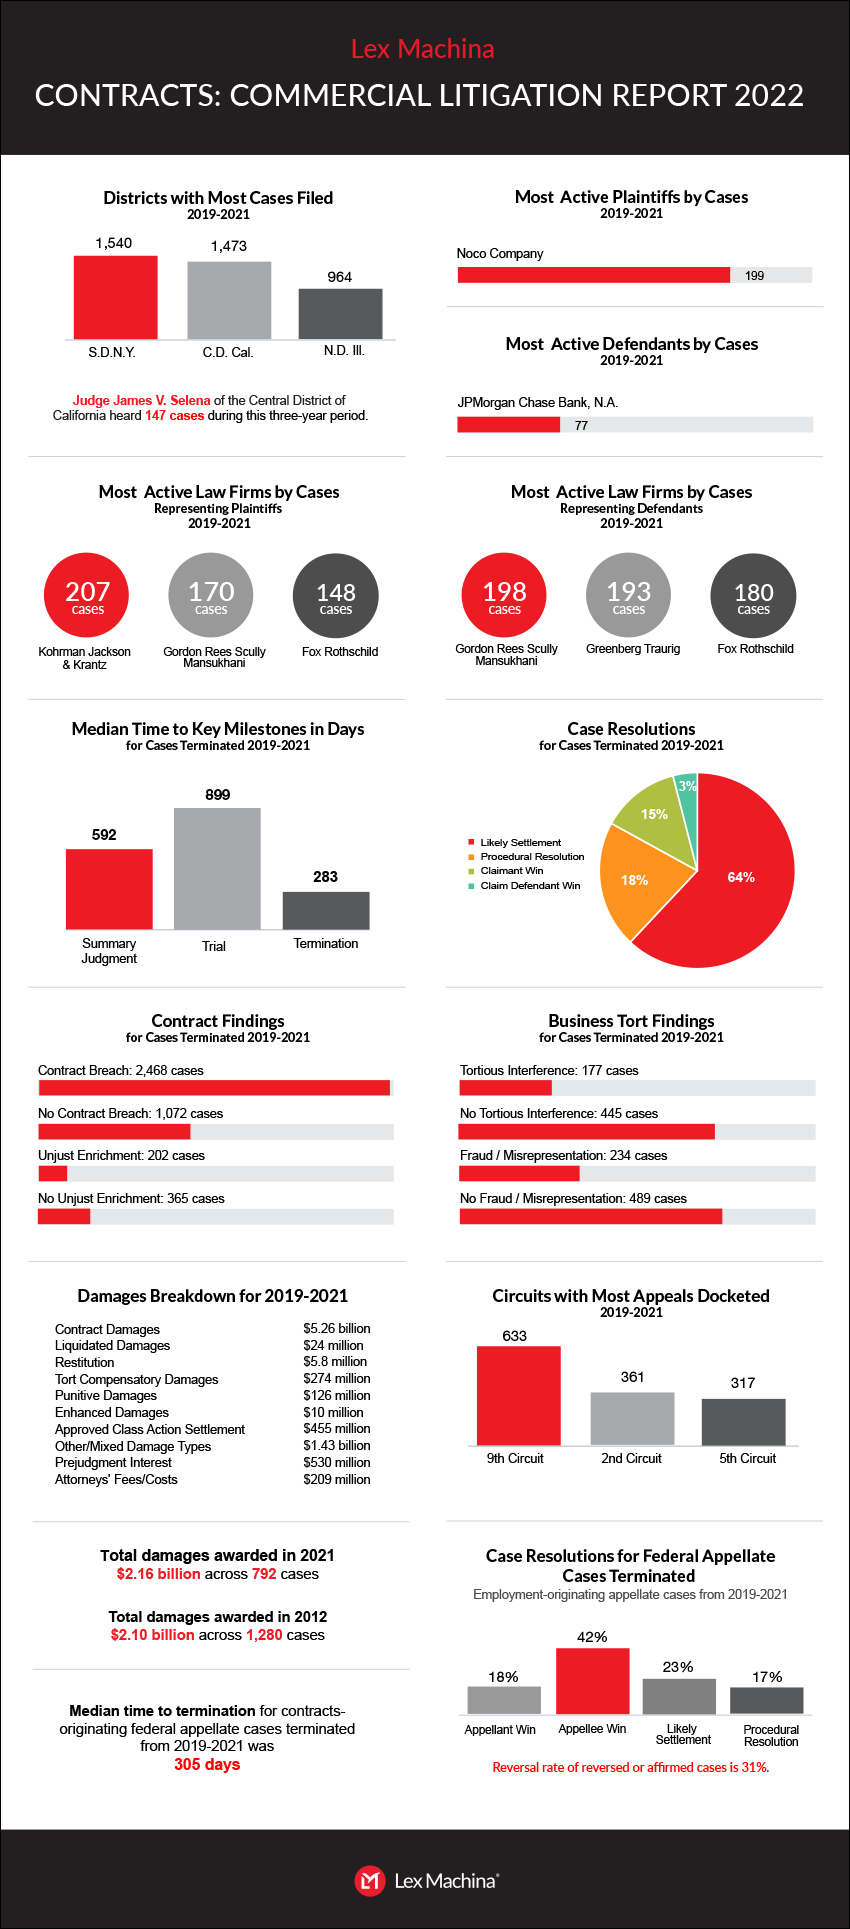 Infographic: Commercial Litigation Report courtesy of Lex Machina.